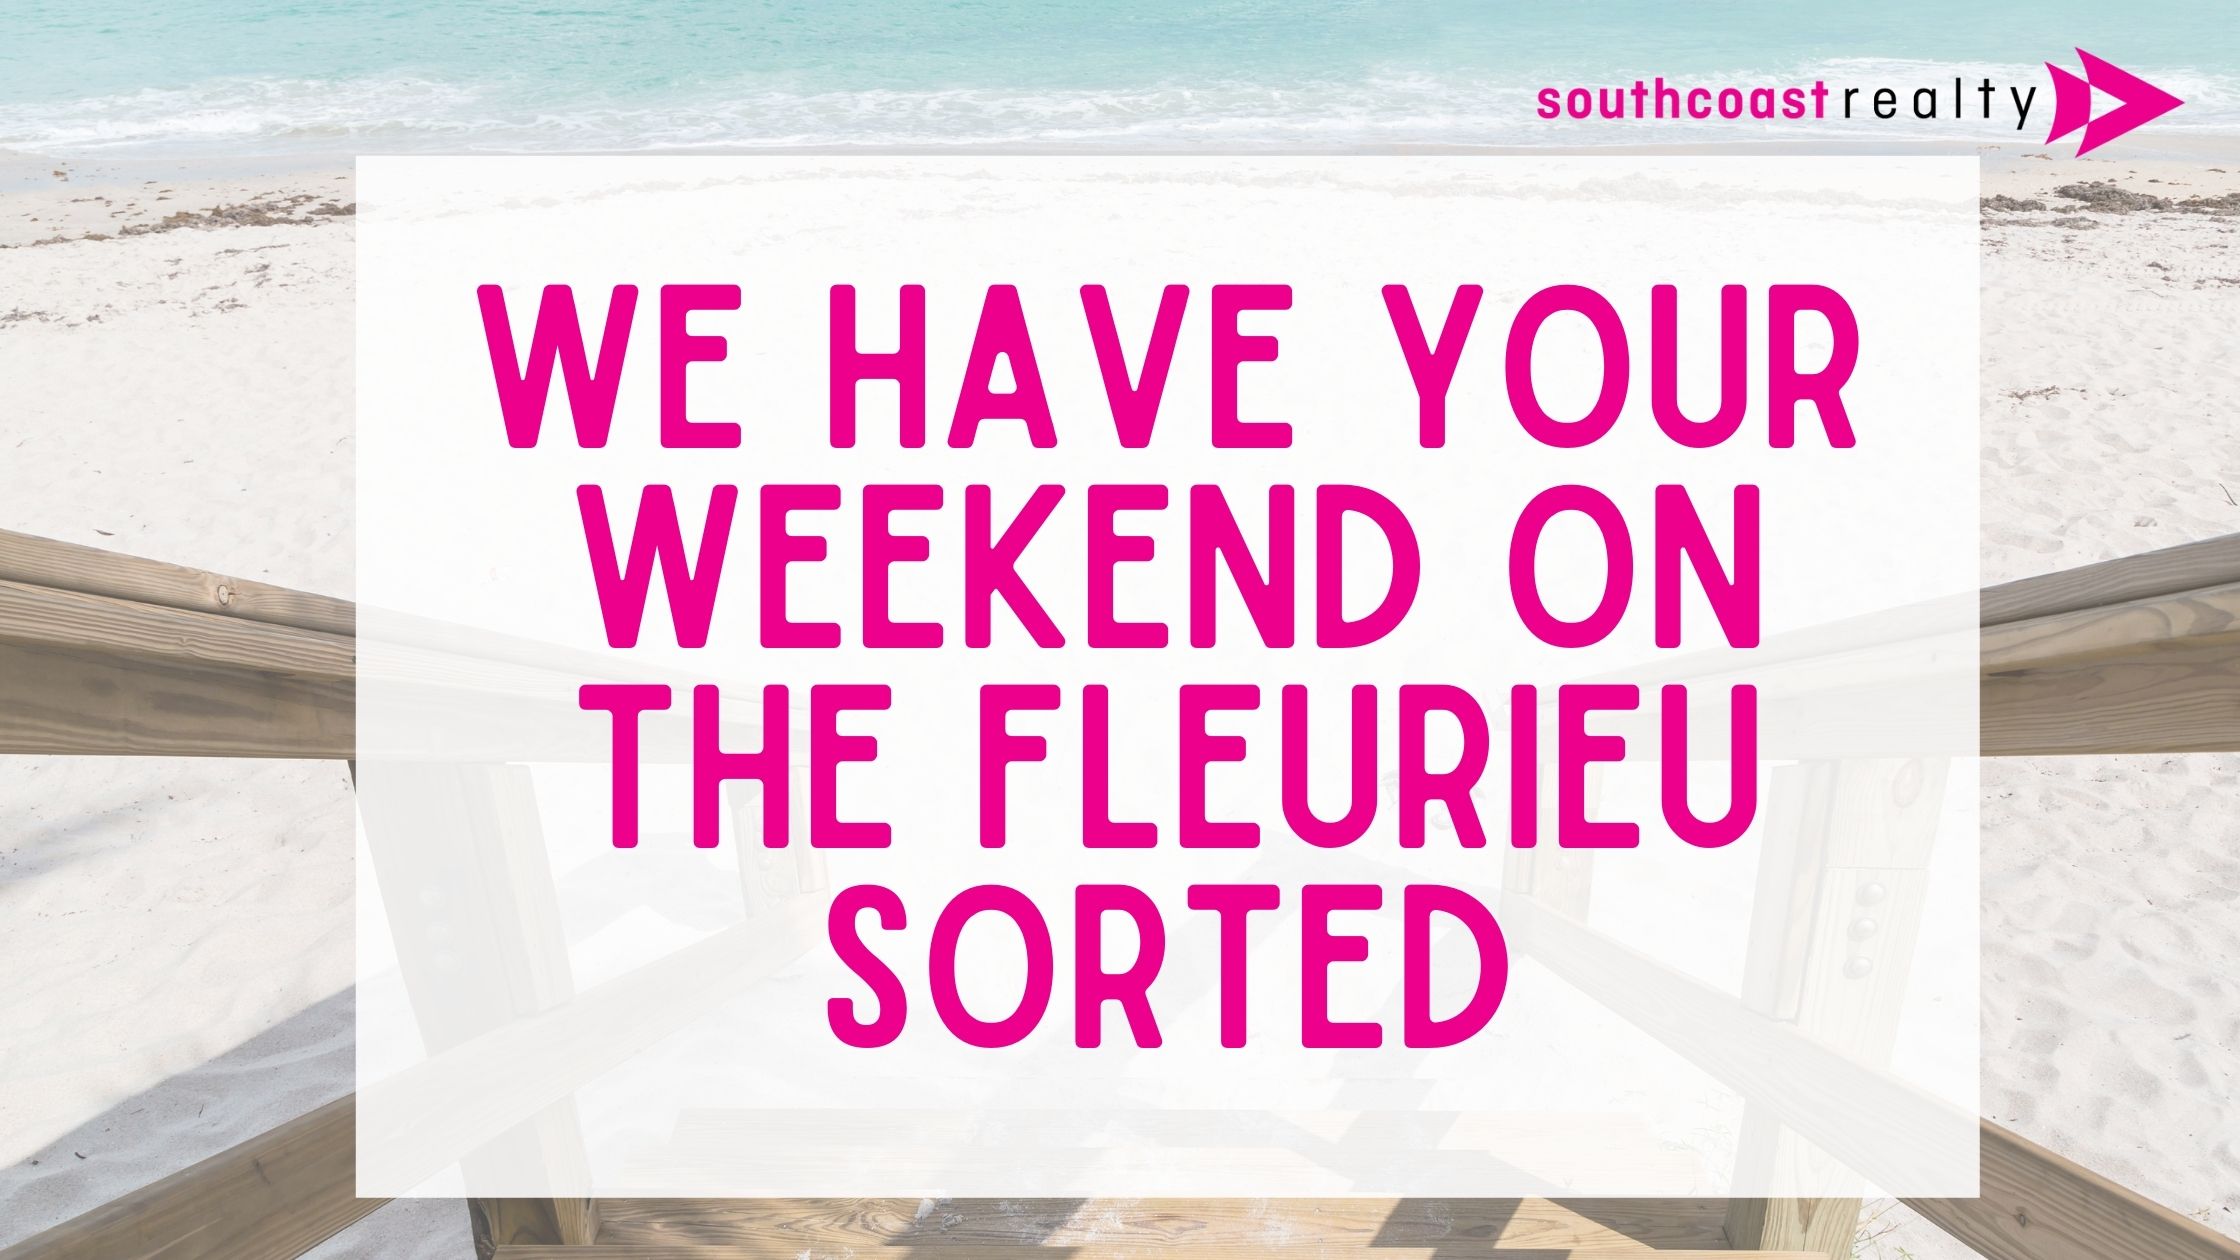 Your weekend on the Fleurieu sorted